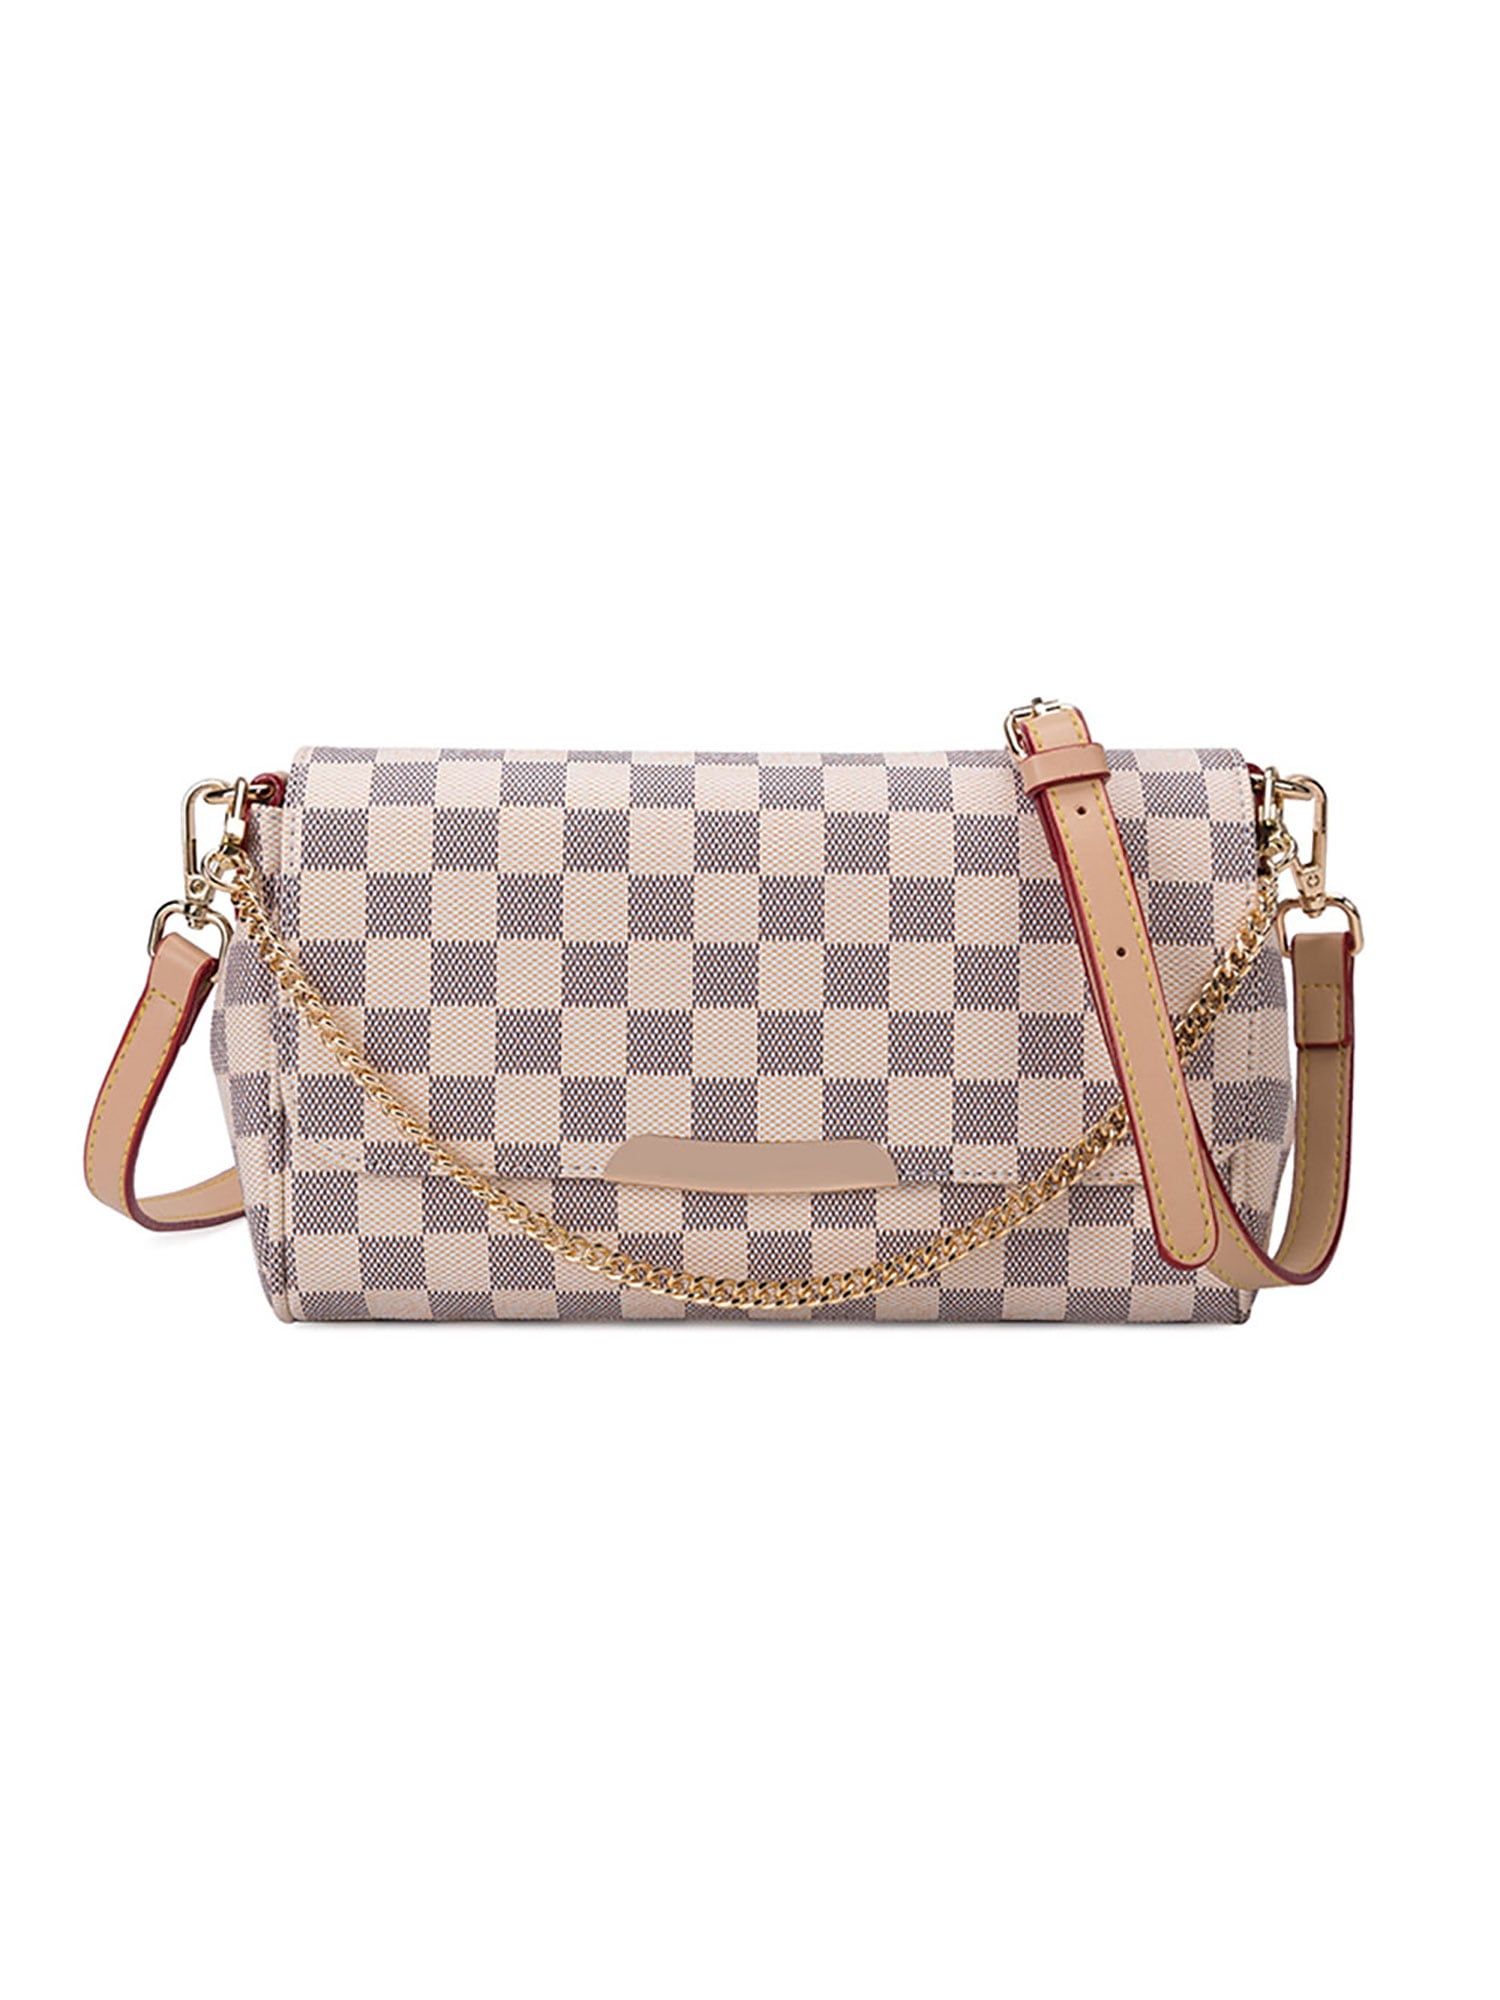 Sexy Dance Checkered Backpack For Women PU Leather Knapsack Anti